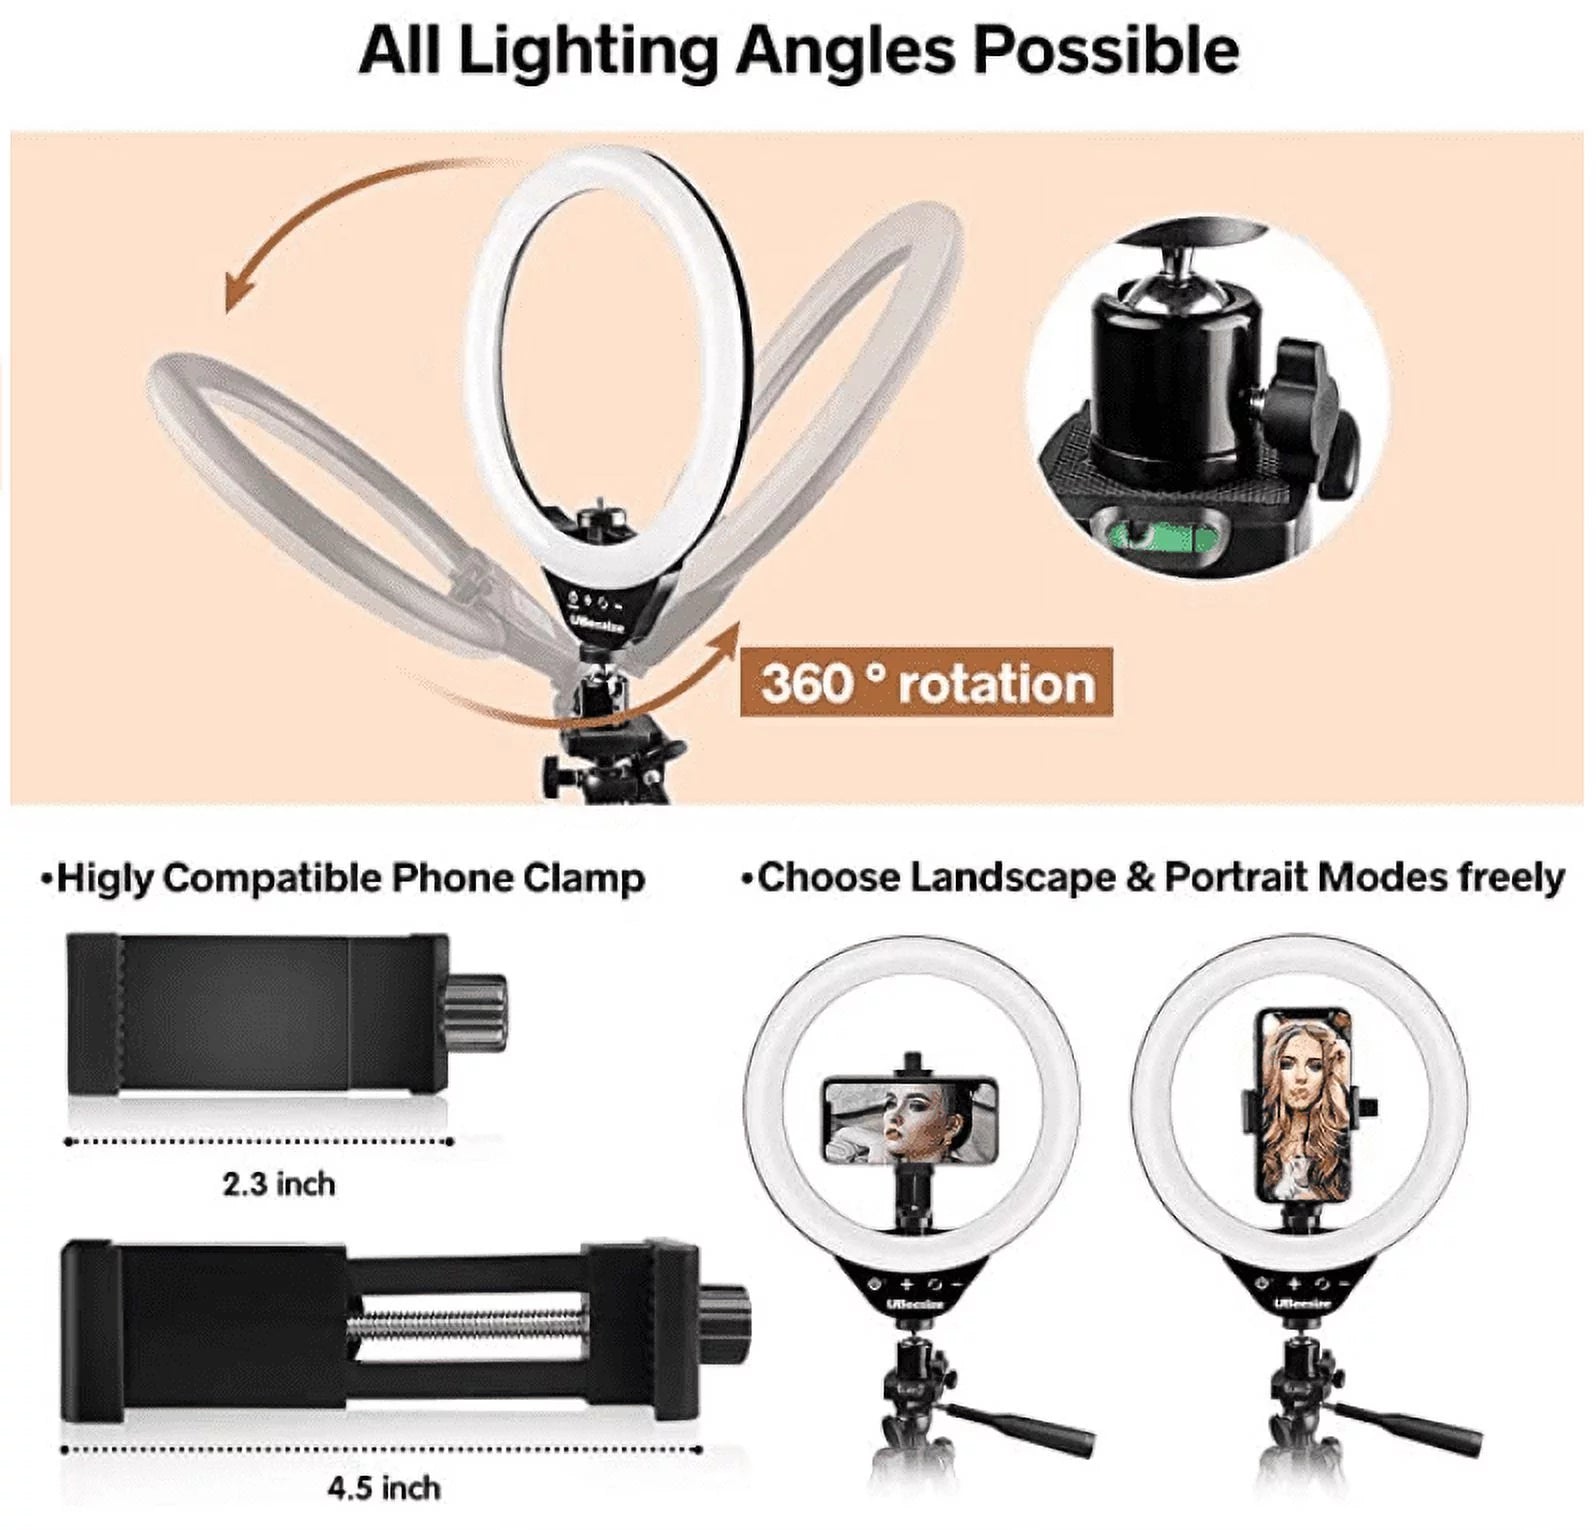 10" LED Ring Light with Stand and Phone Holder, Selfie Halo Light for Photography/Makeup/Vlogging/Live Streaming, Compatible with Phones and Cameras (2020 Version)